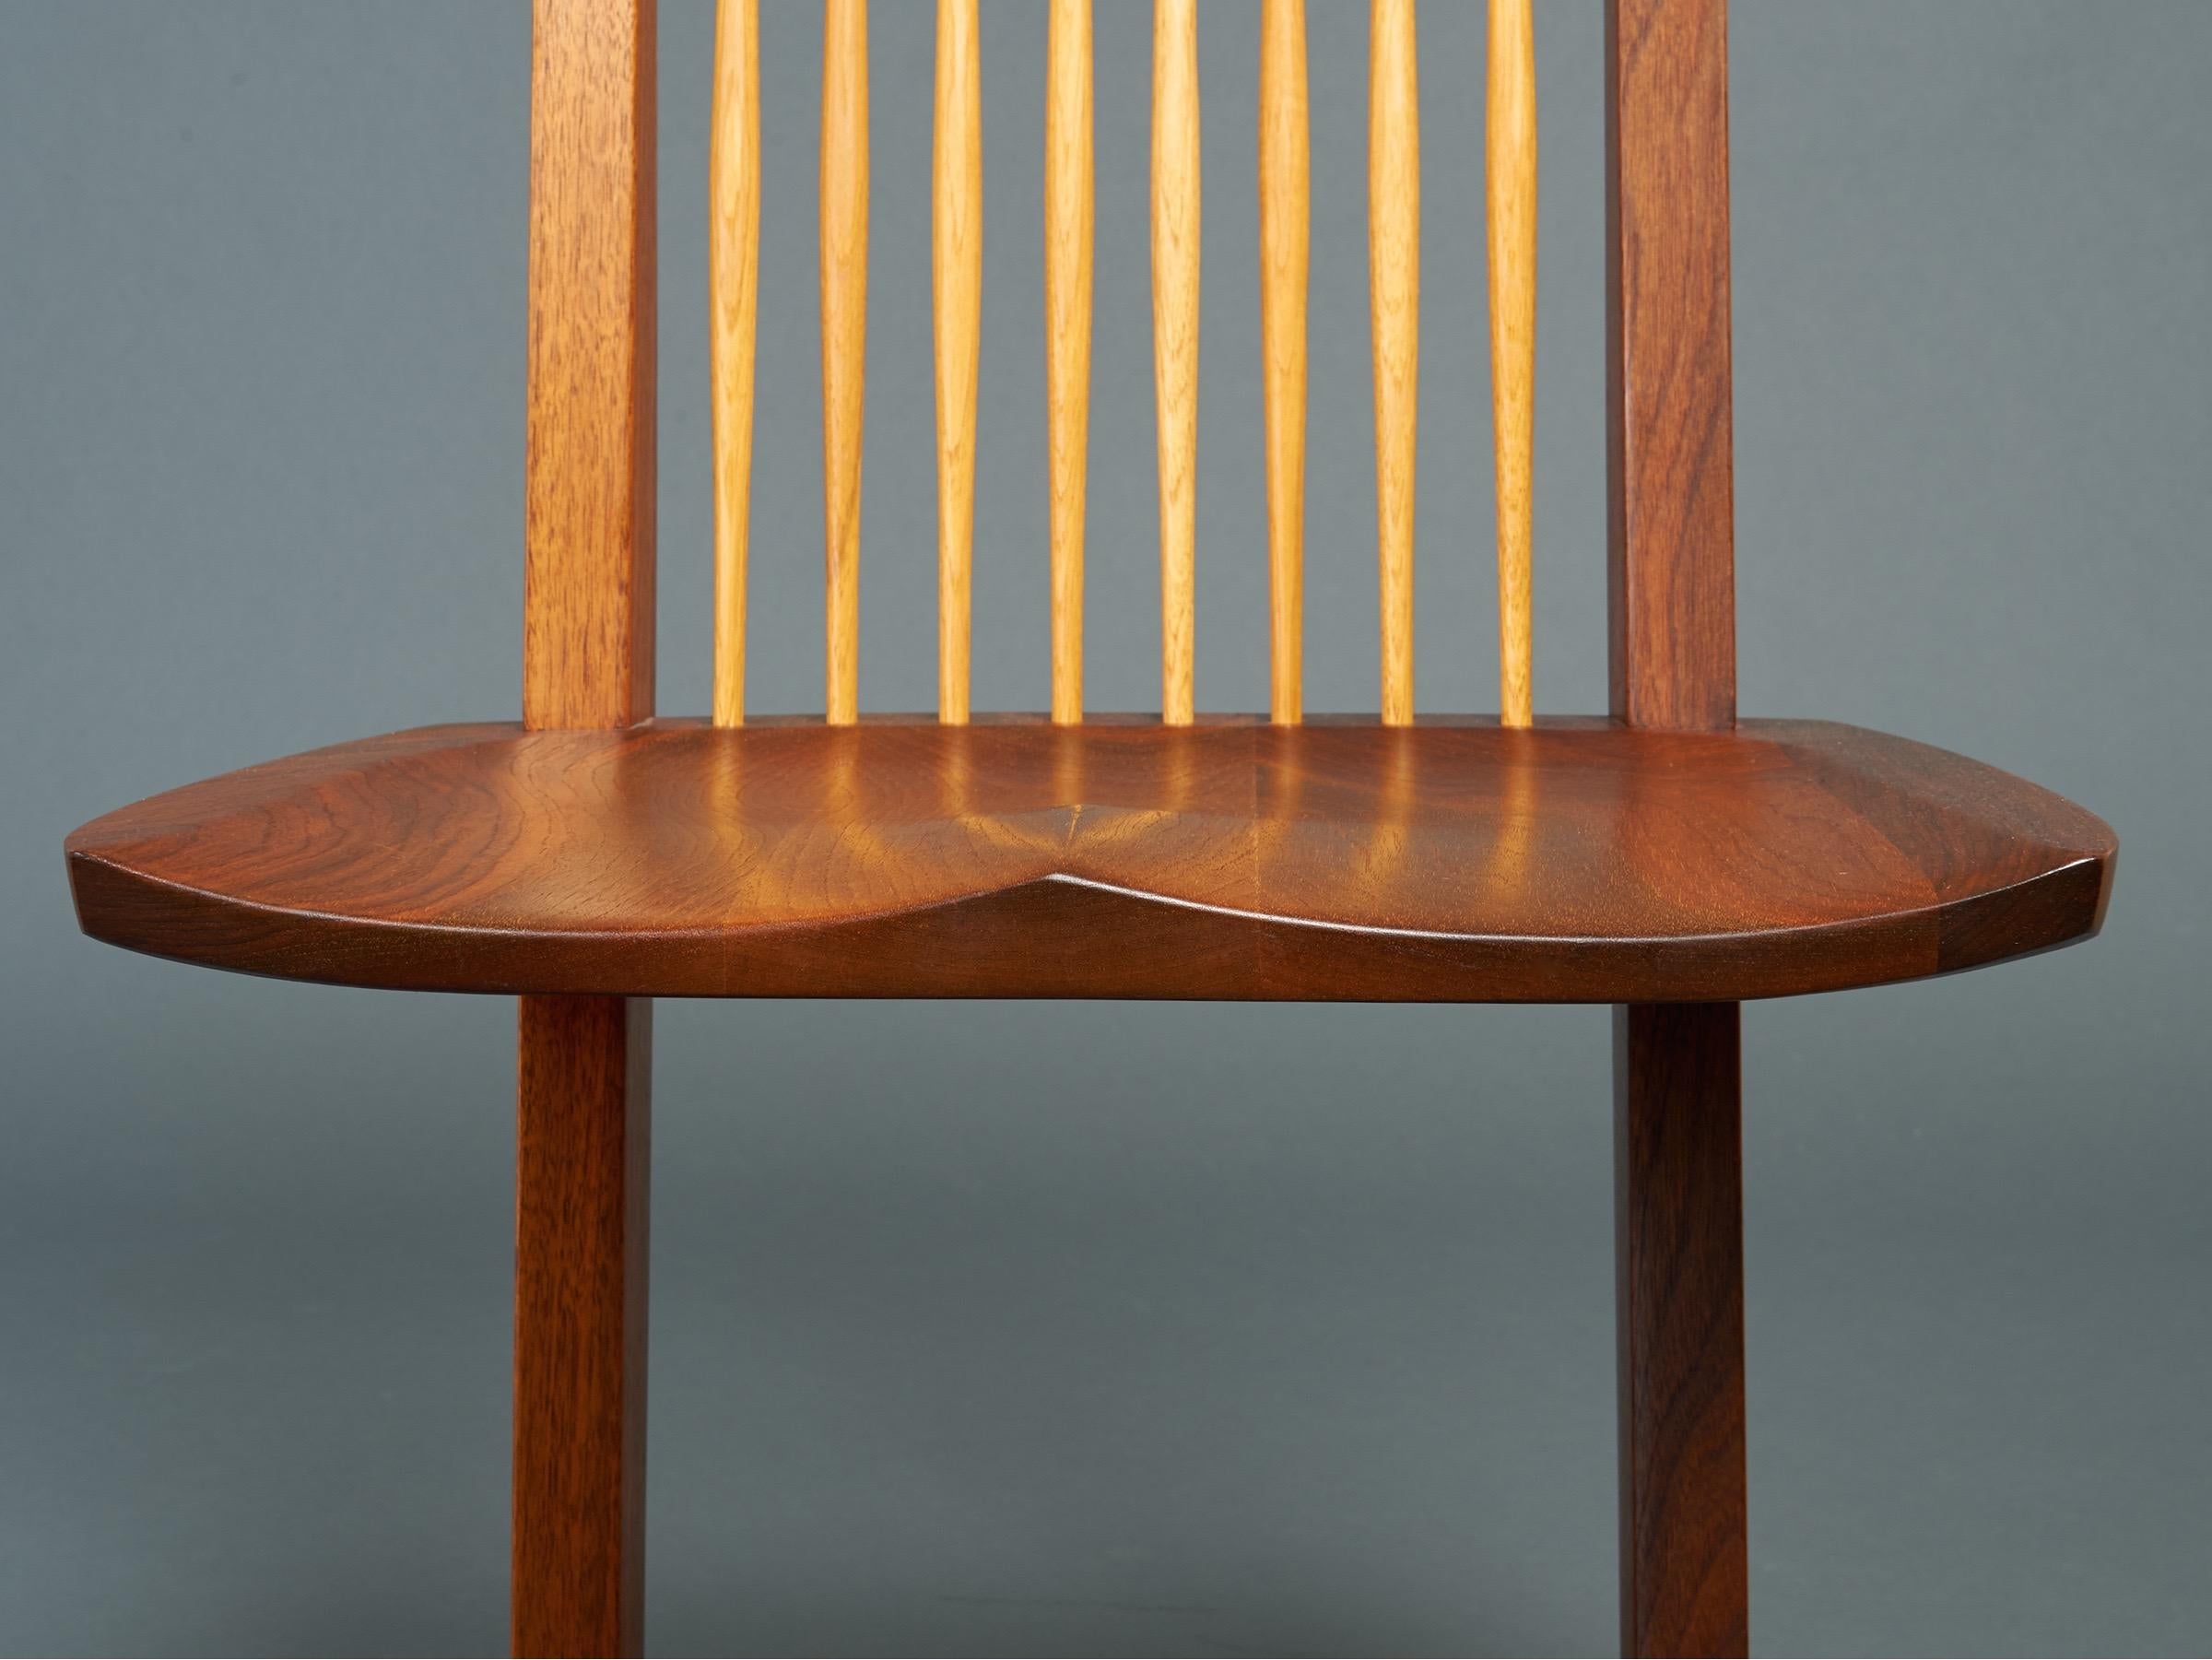 George Nakashima, Rare Sculptural Pair of Conoid Chairs in Walnut, Signed, 1989 For Sale 7